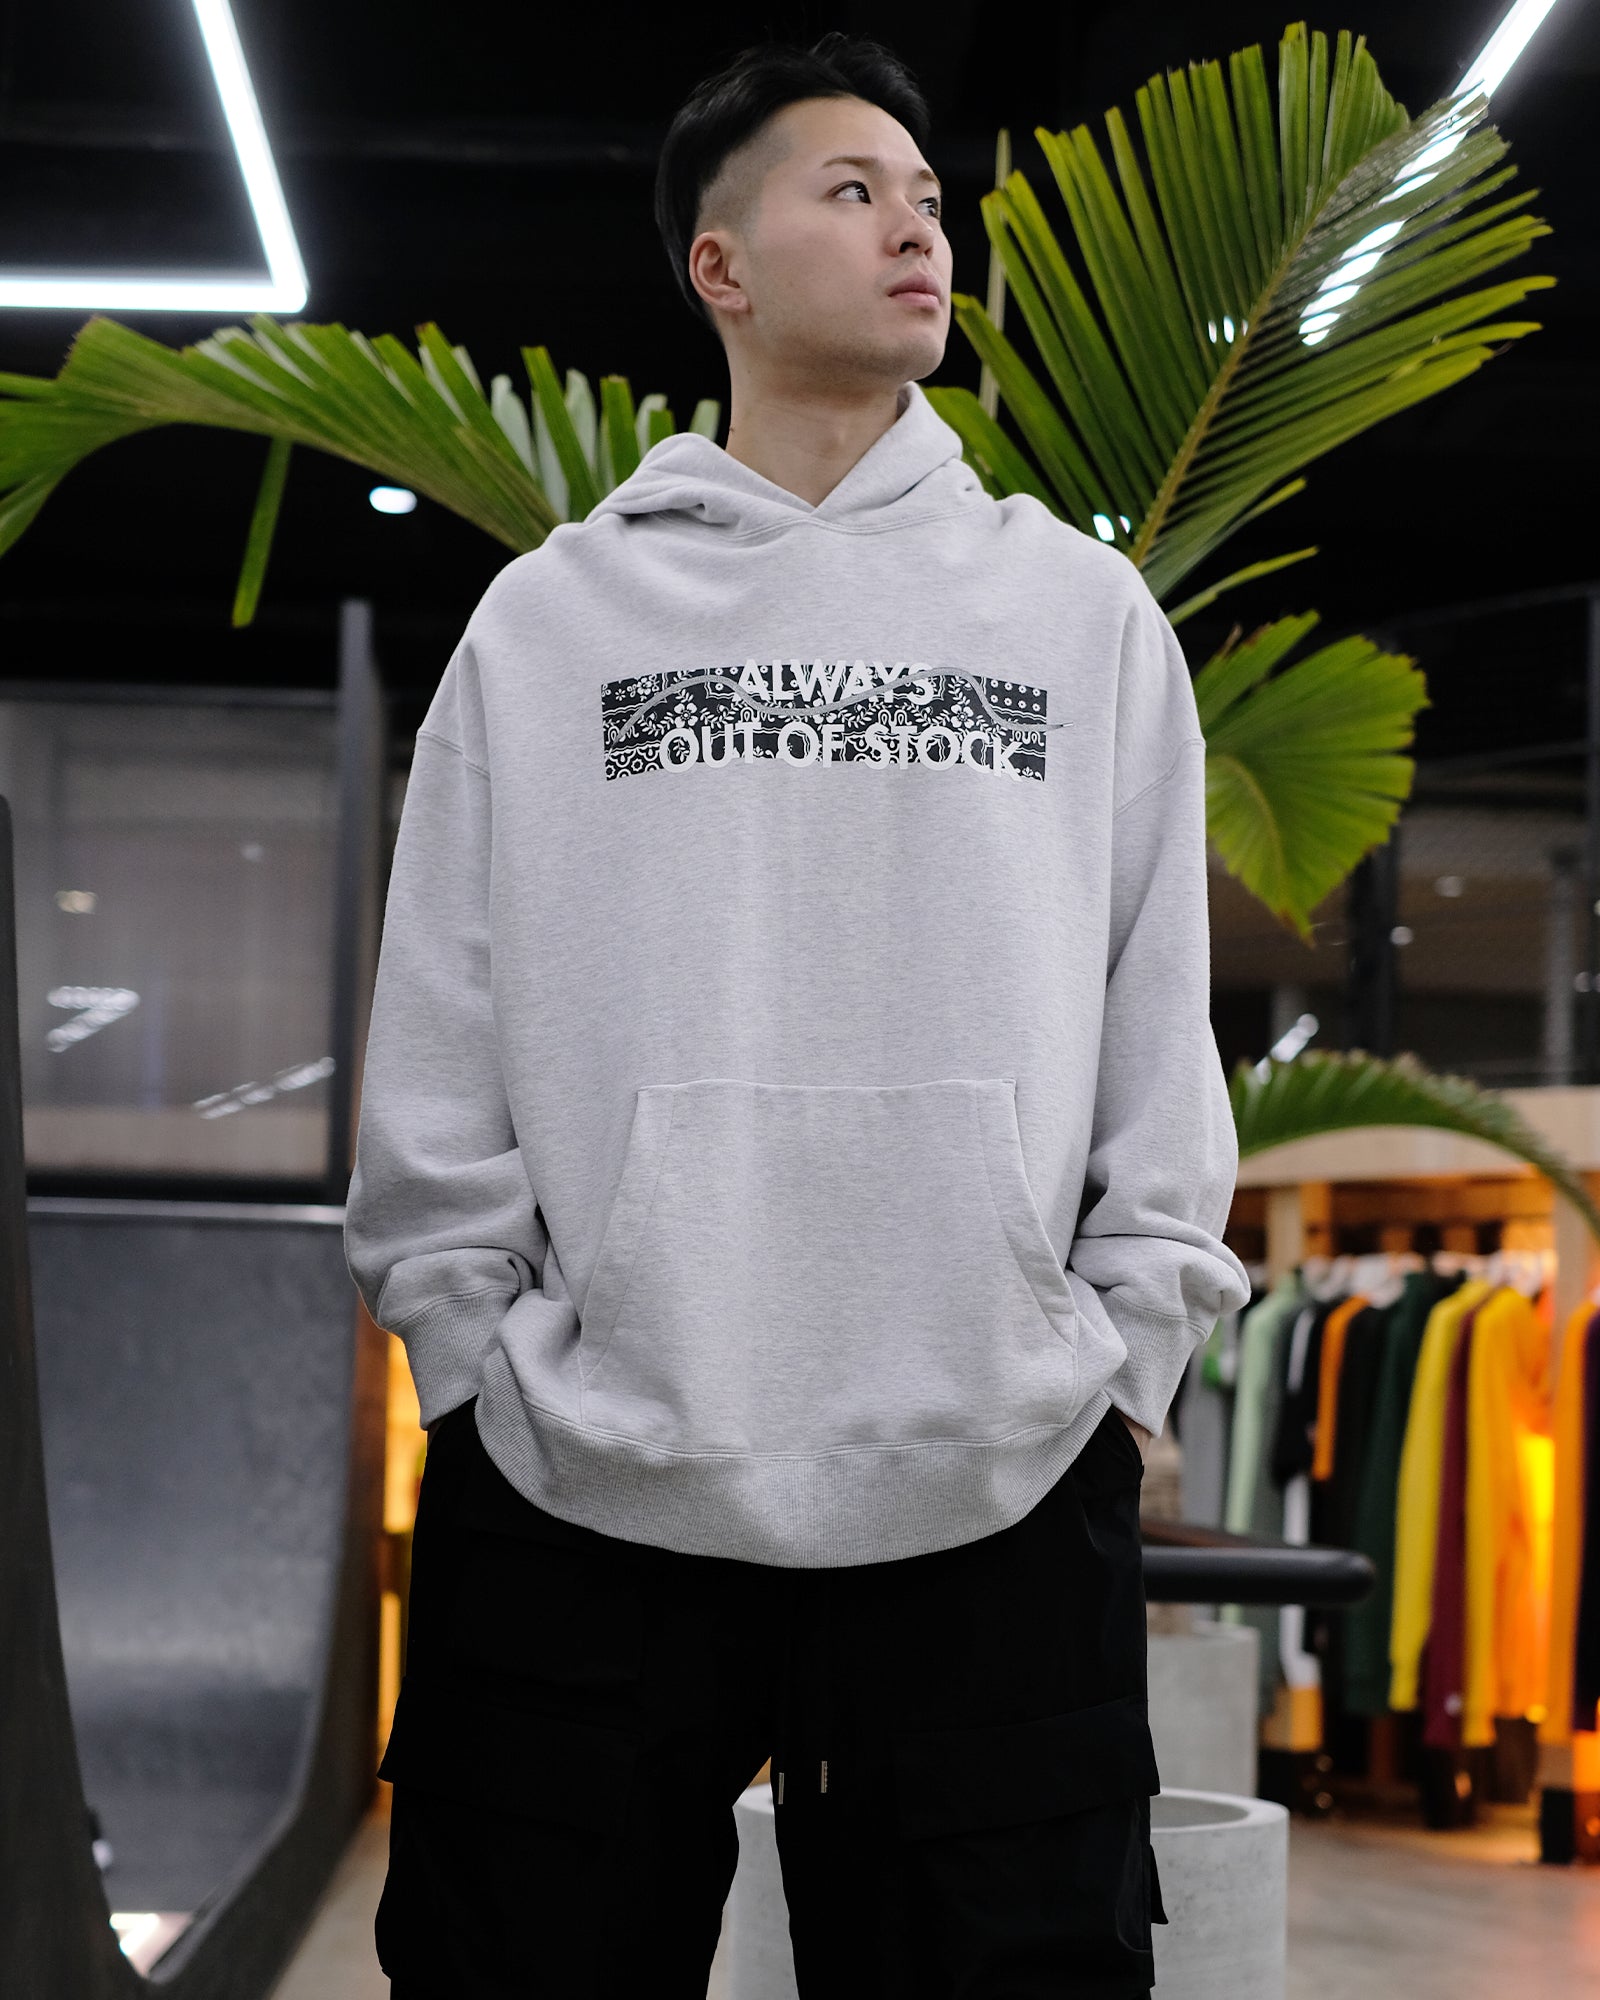 ALWAYS OUT OF STOCK X REYN SPOONER SHOELACE PULLOVER – Application